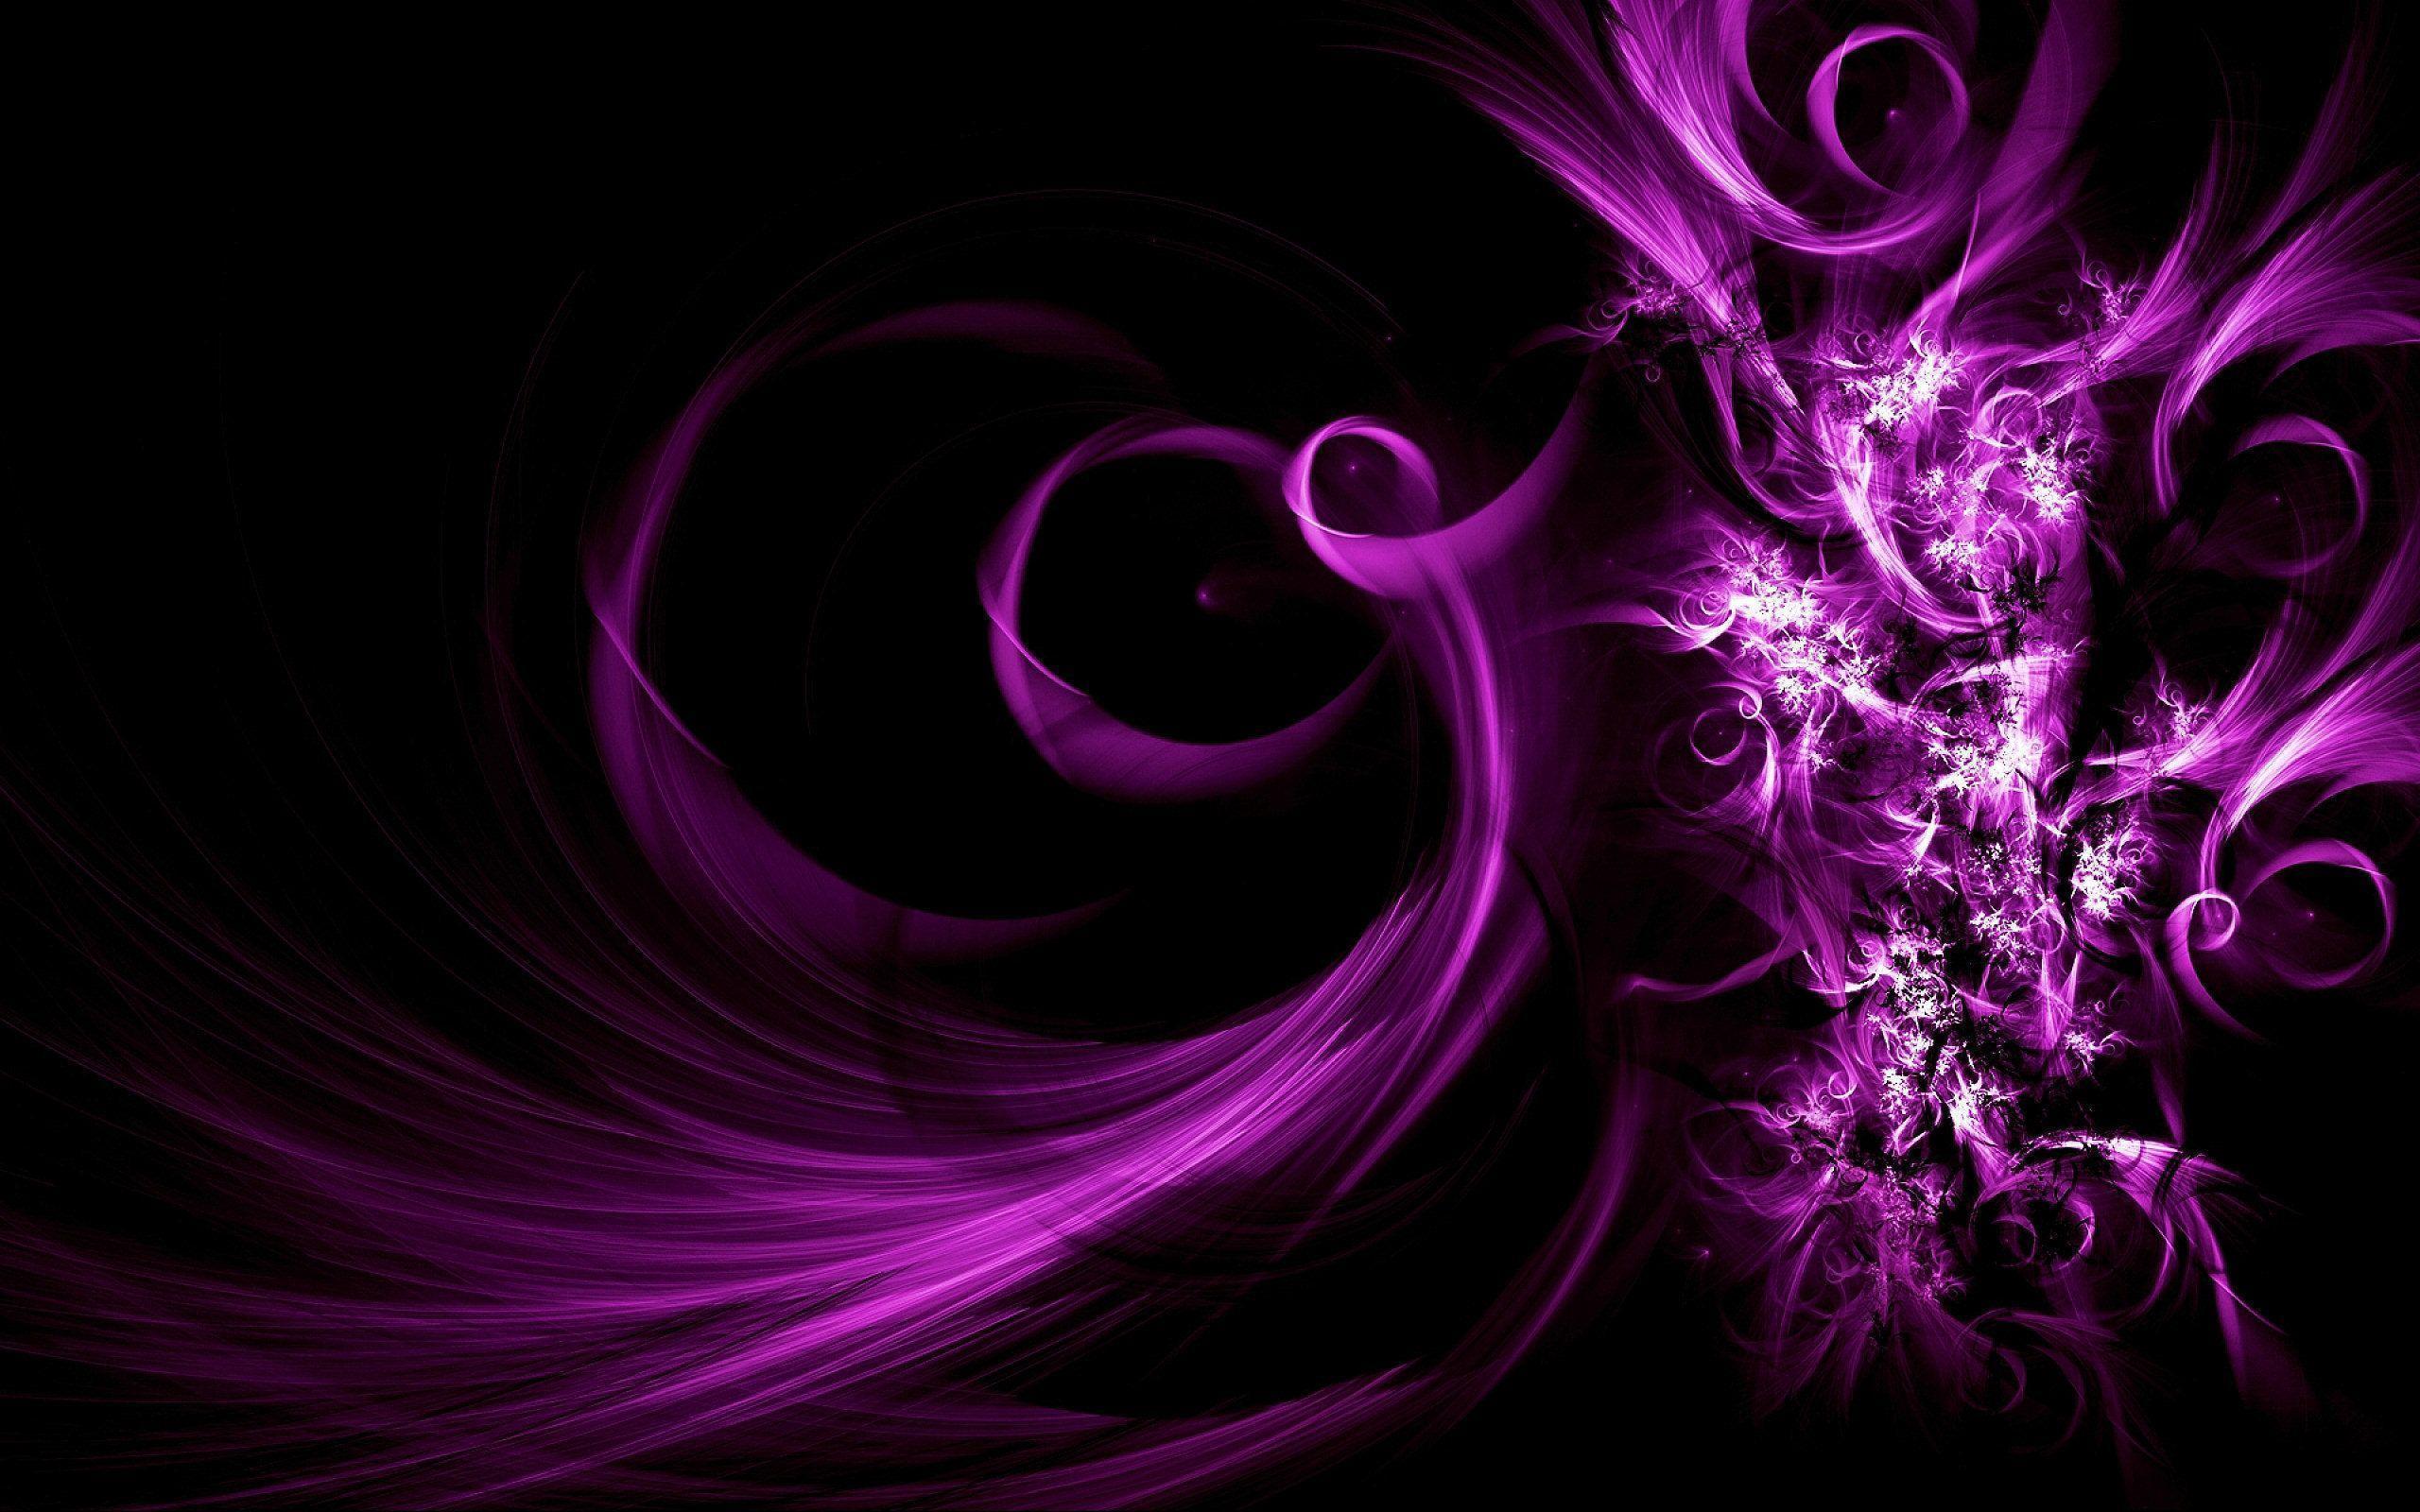 Black And Purple Abstract Background Image 6 HD Wallpaper